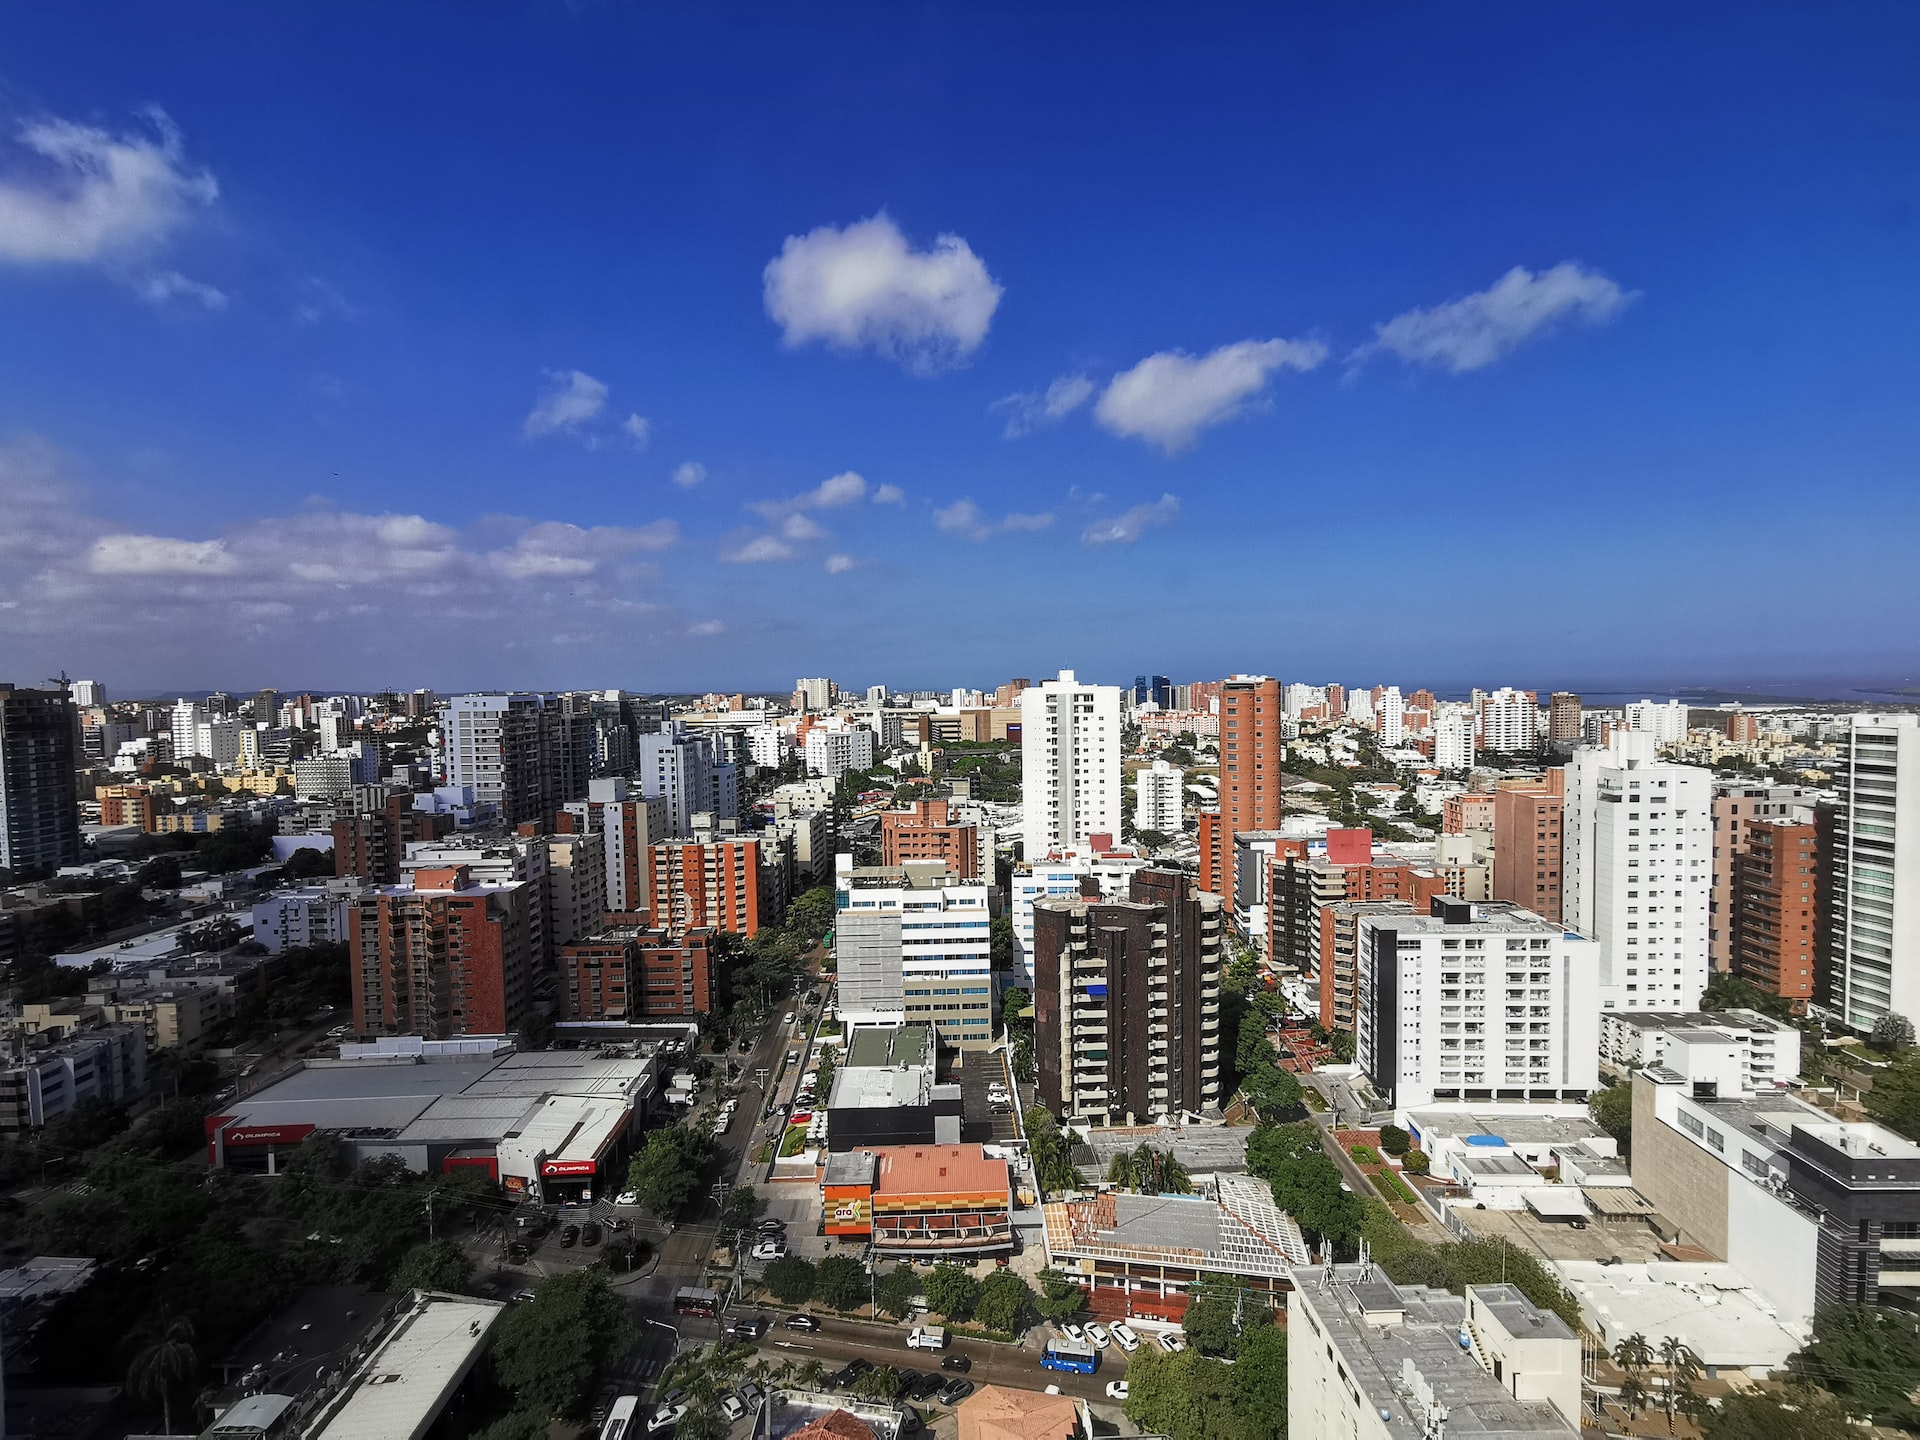 Skyview Of The City of Barranquilla